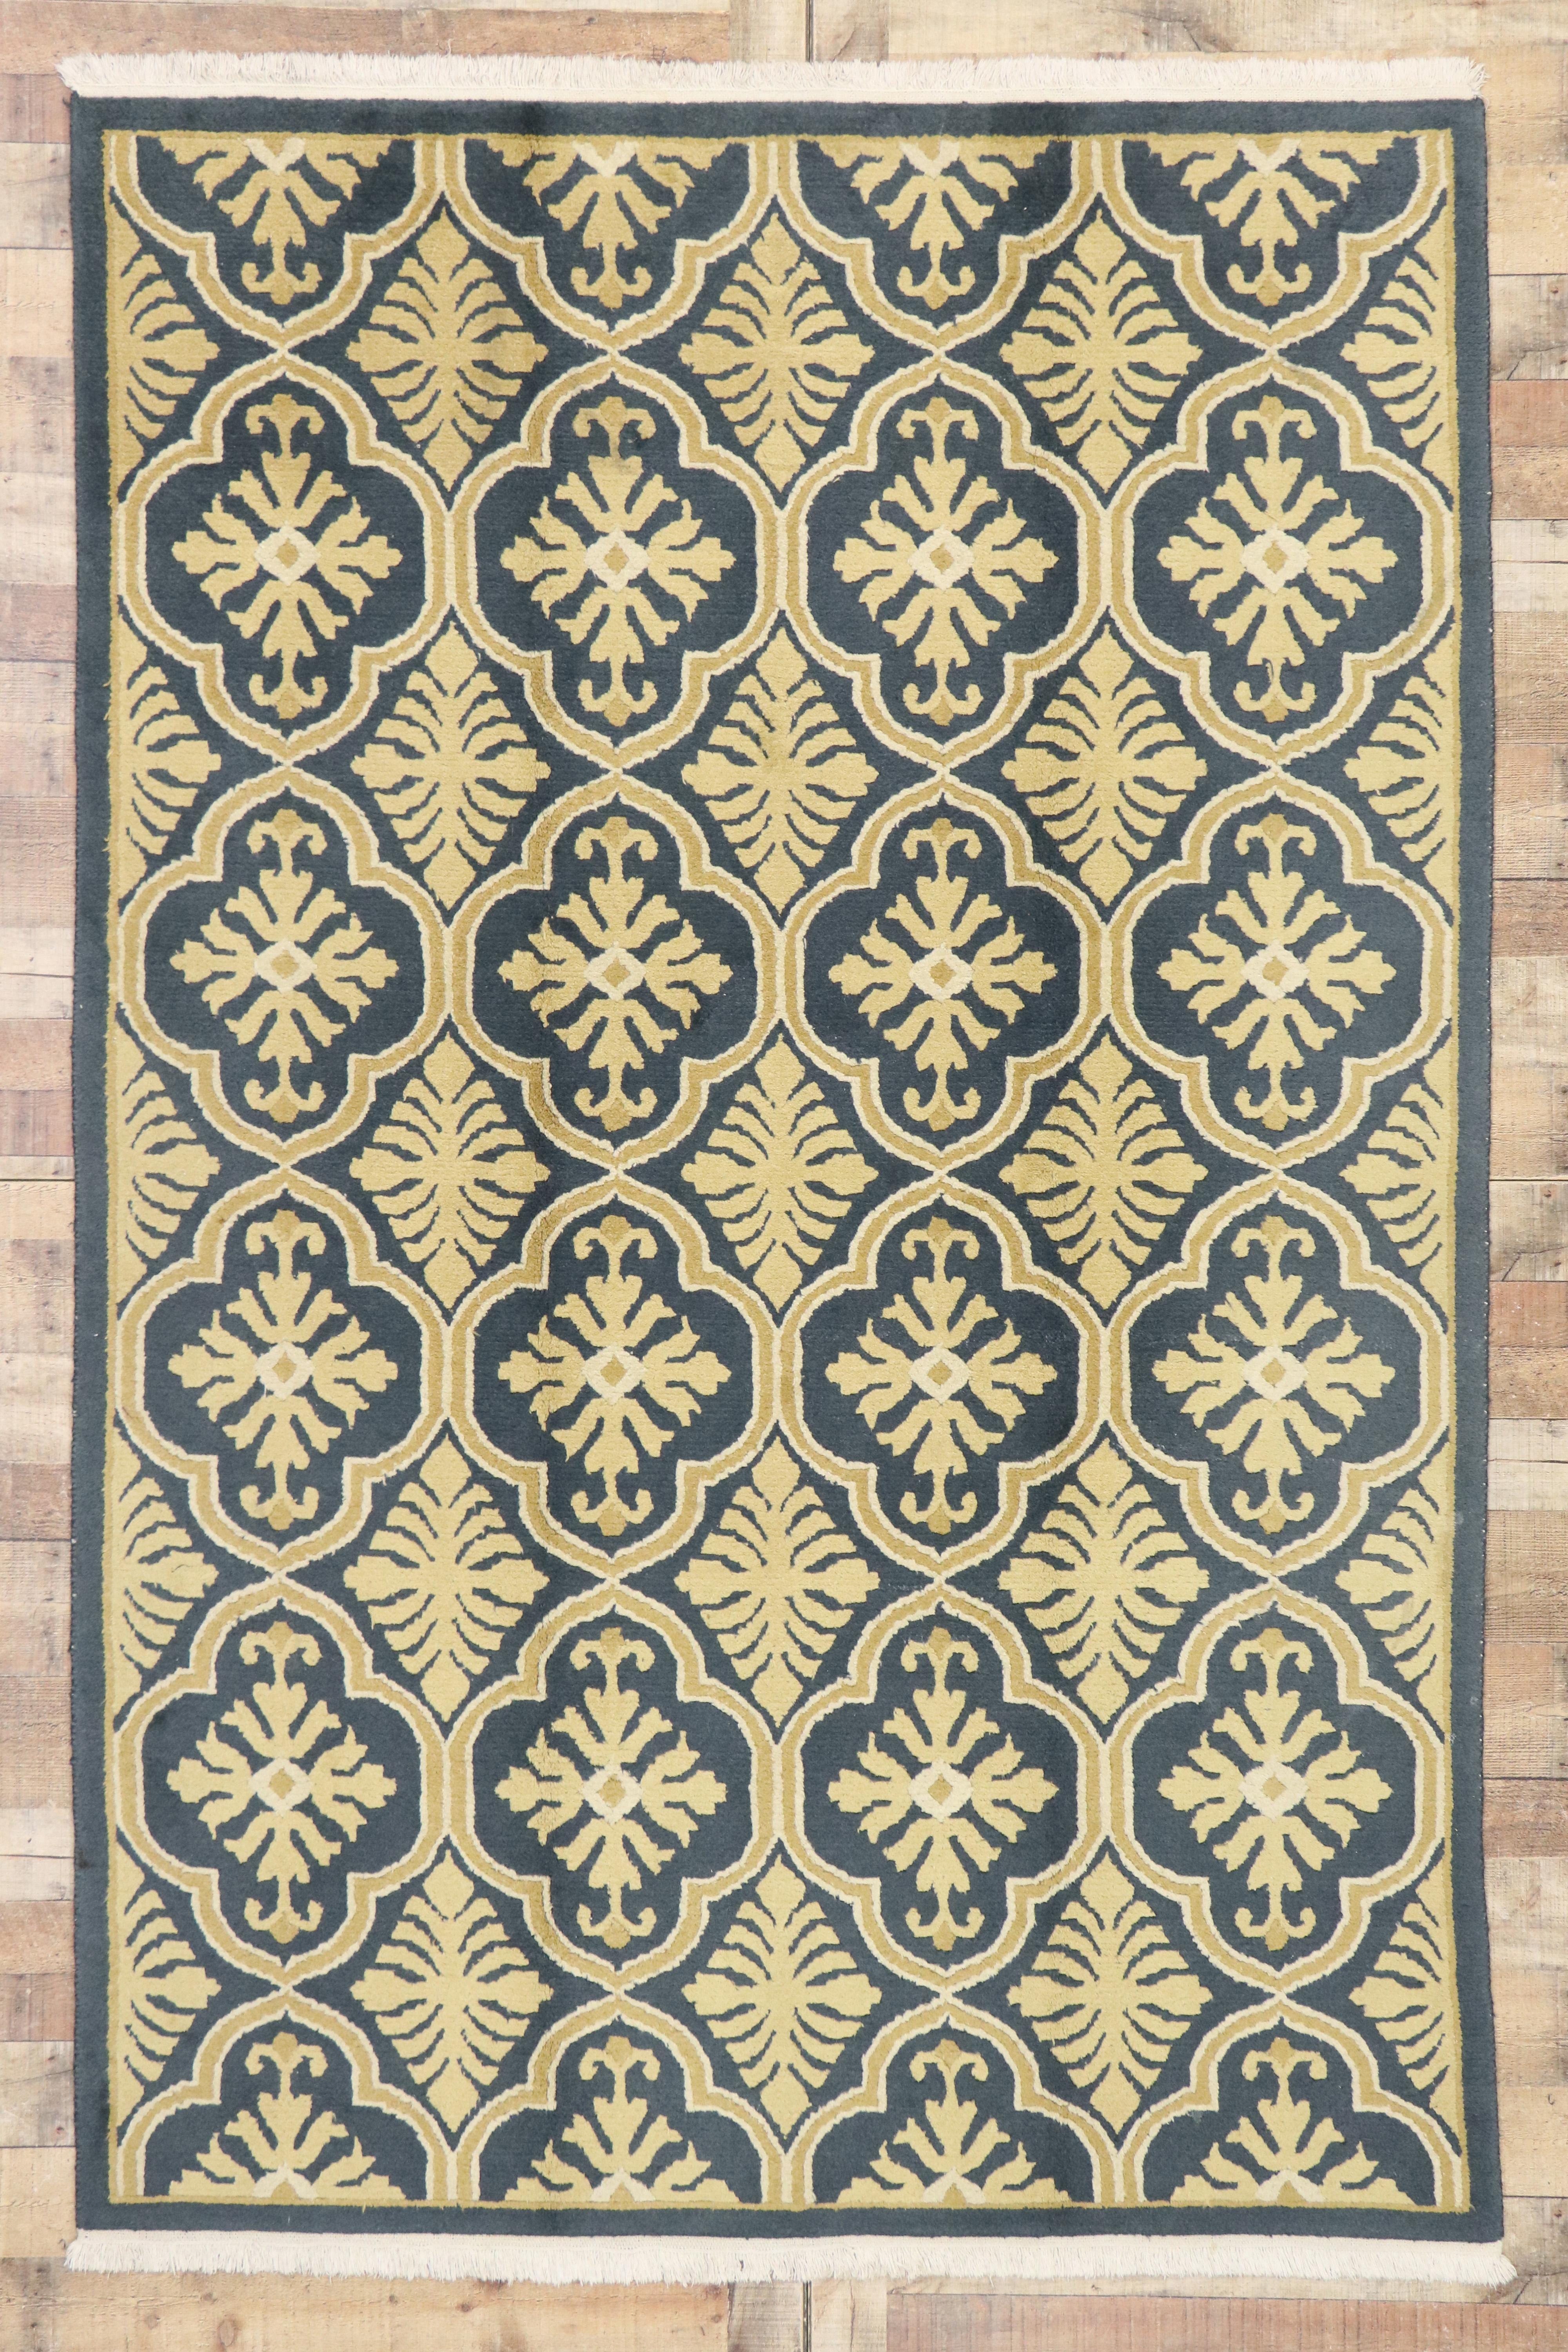 Vintage Transitional Quatrefoil Geometric Rug with Hollywood Regency Style For Sale 2